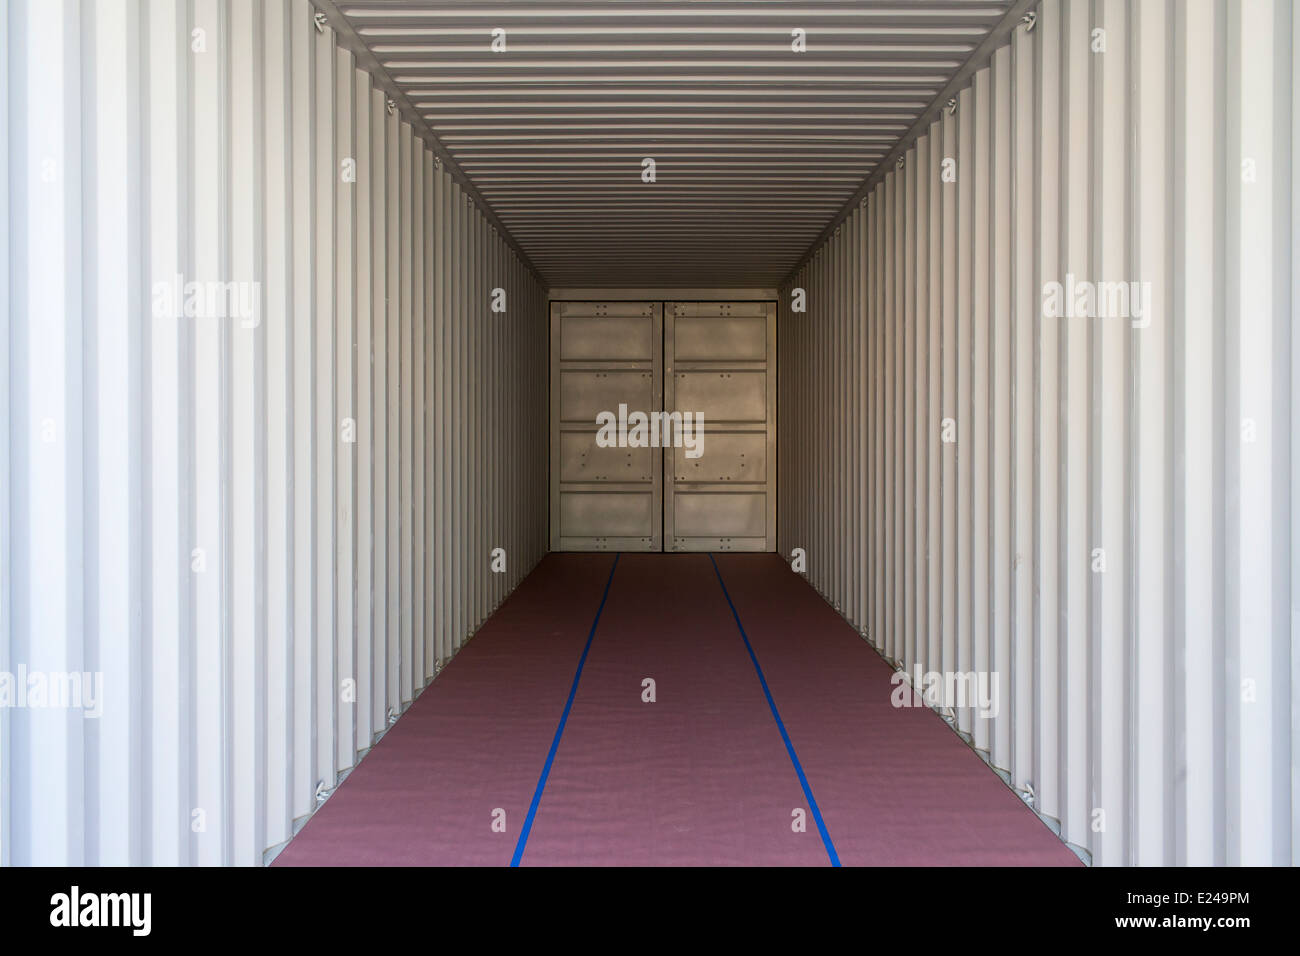 A Symmetrical Image Of The Interior Of A Standard Cargo